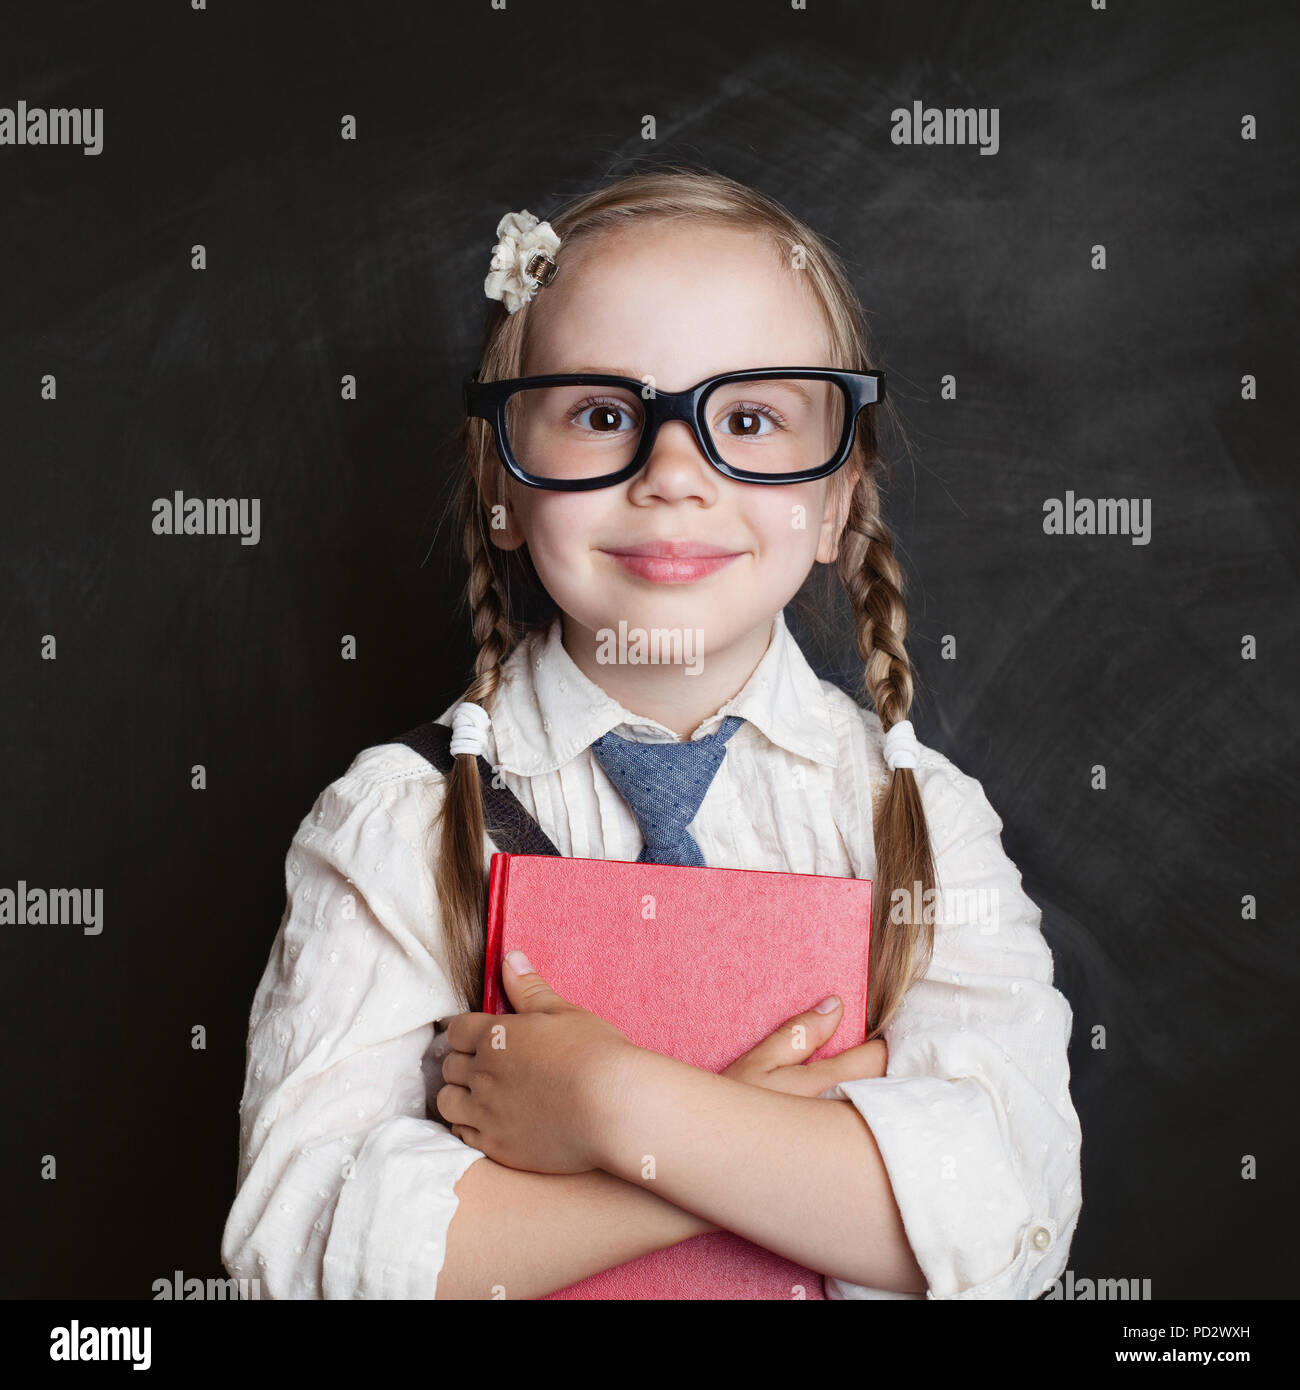 Happy child with book on chalkboard background. Back to school, elementary school lesson and education concept Stock Photo